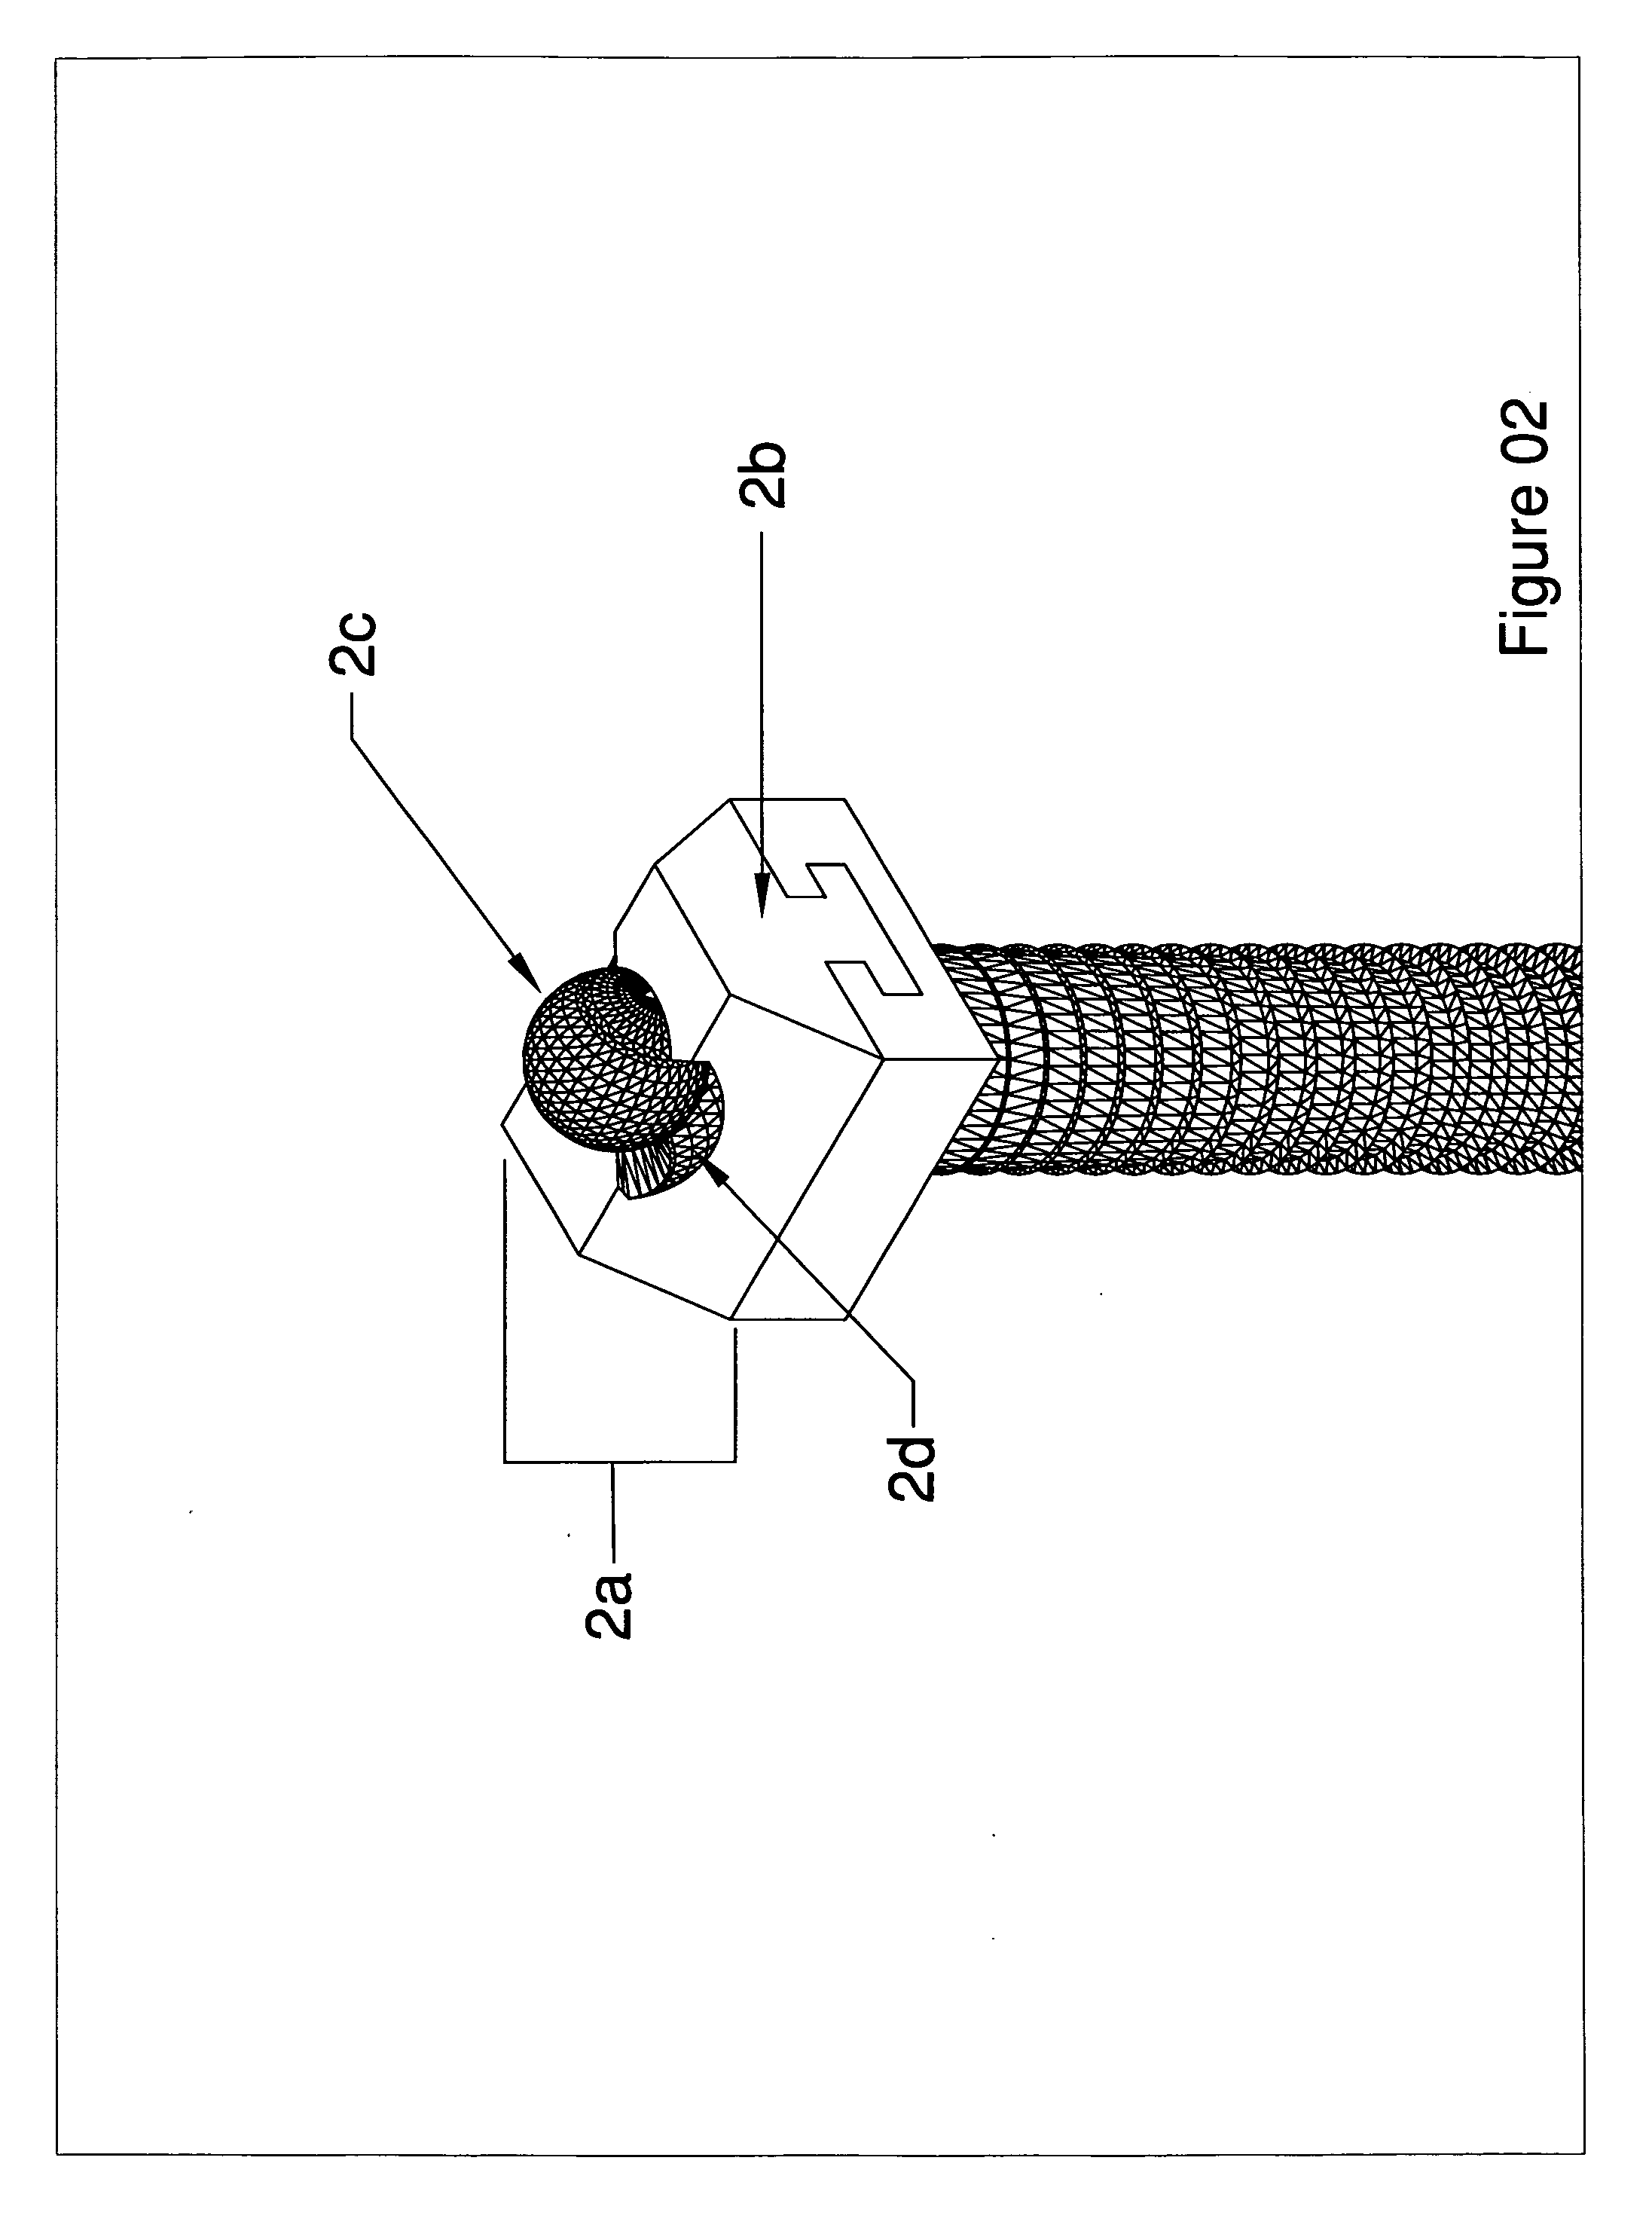 Tension fixation system